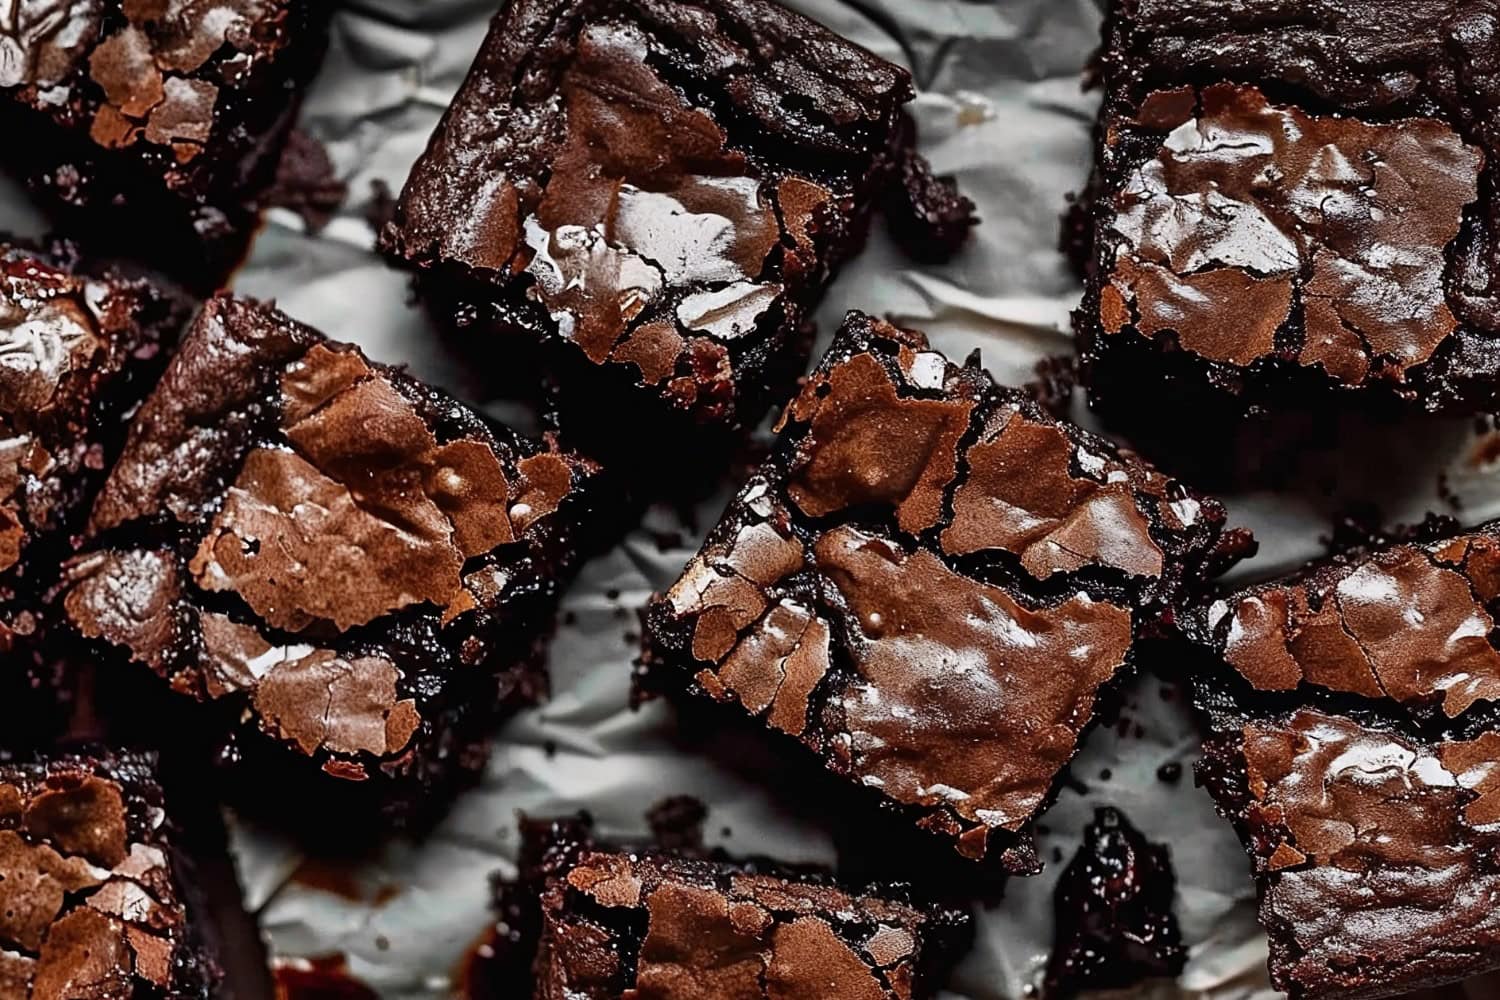 Top View of Chocolate Brownies on Parchment Paper